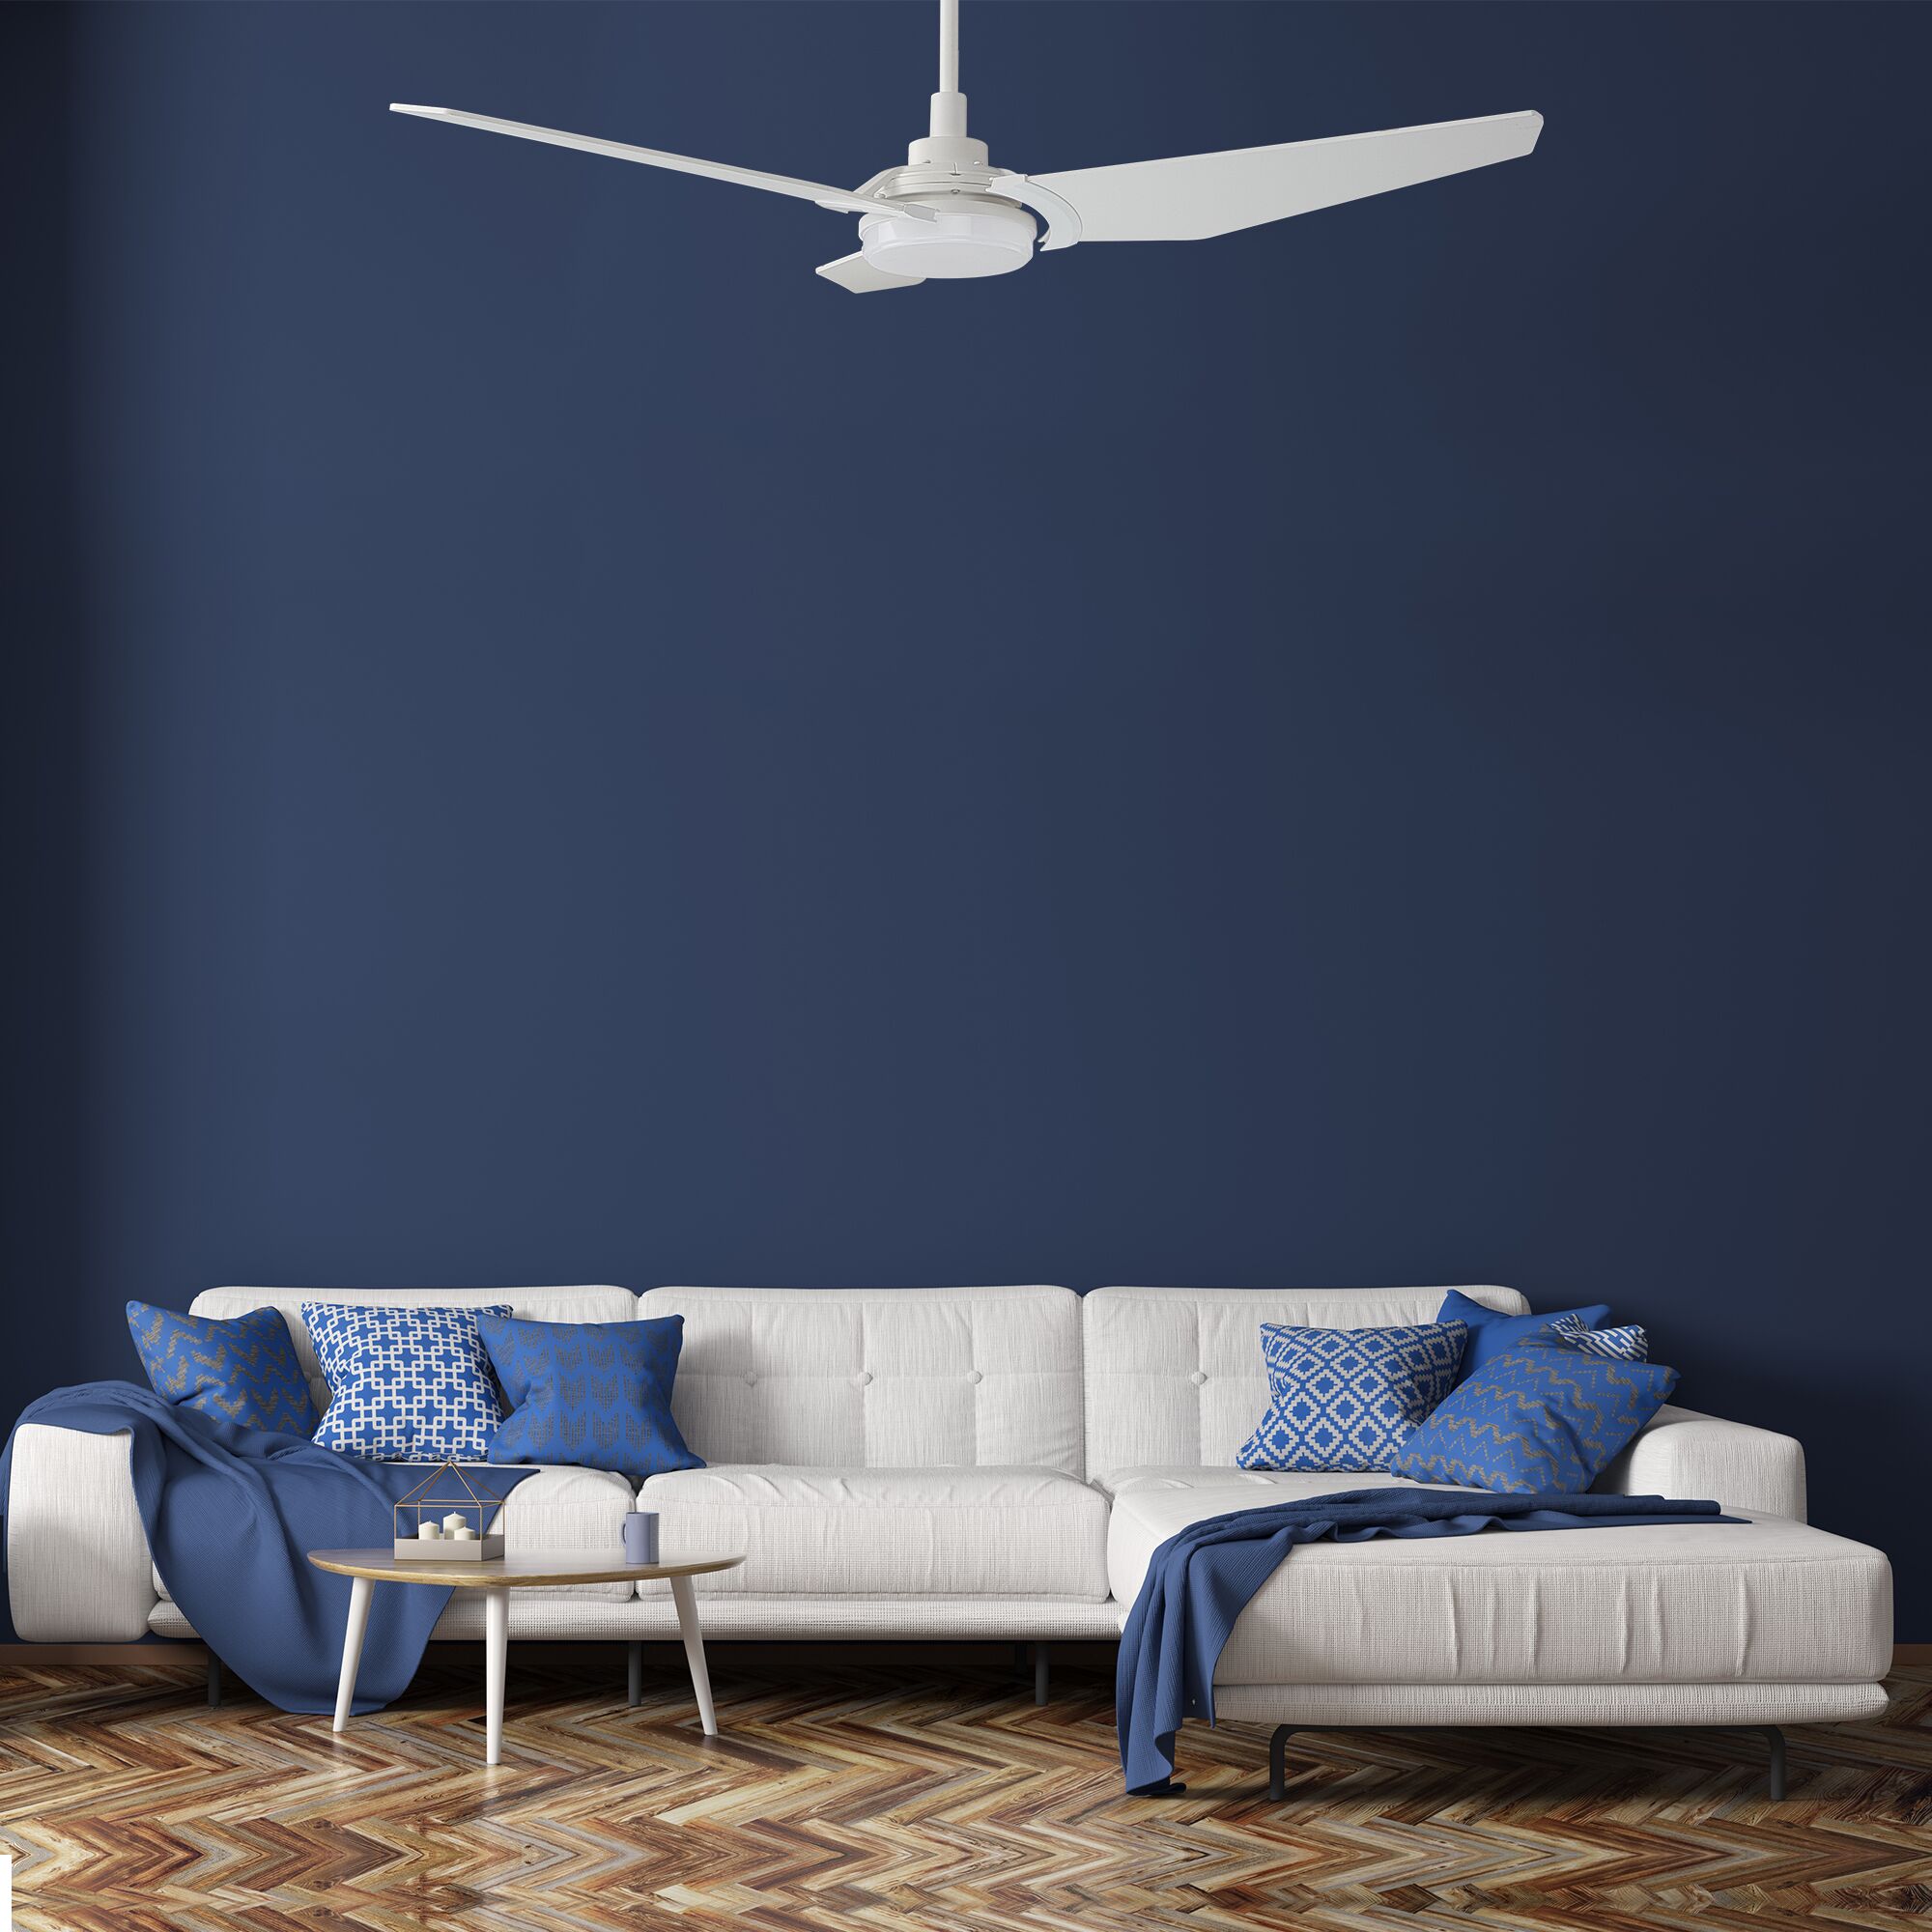 The Smafan Trailblazer 52&#39;&#39; Smart Fan’s sleek and stylish design fits perfectly with any décor trend. With a fully dimmable, and energy-efficient LED kit, whisper-quiet operation, compatible with Alexa, Google Assistant, Sir, phone app, easy install, Trailblazer helps you have a smarter way to stay cool.